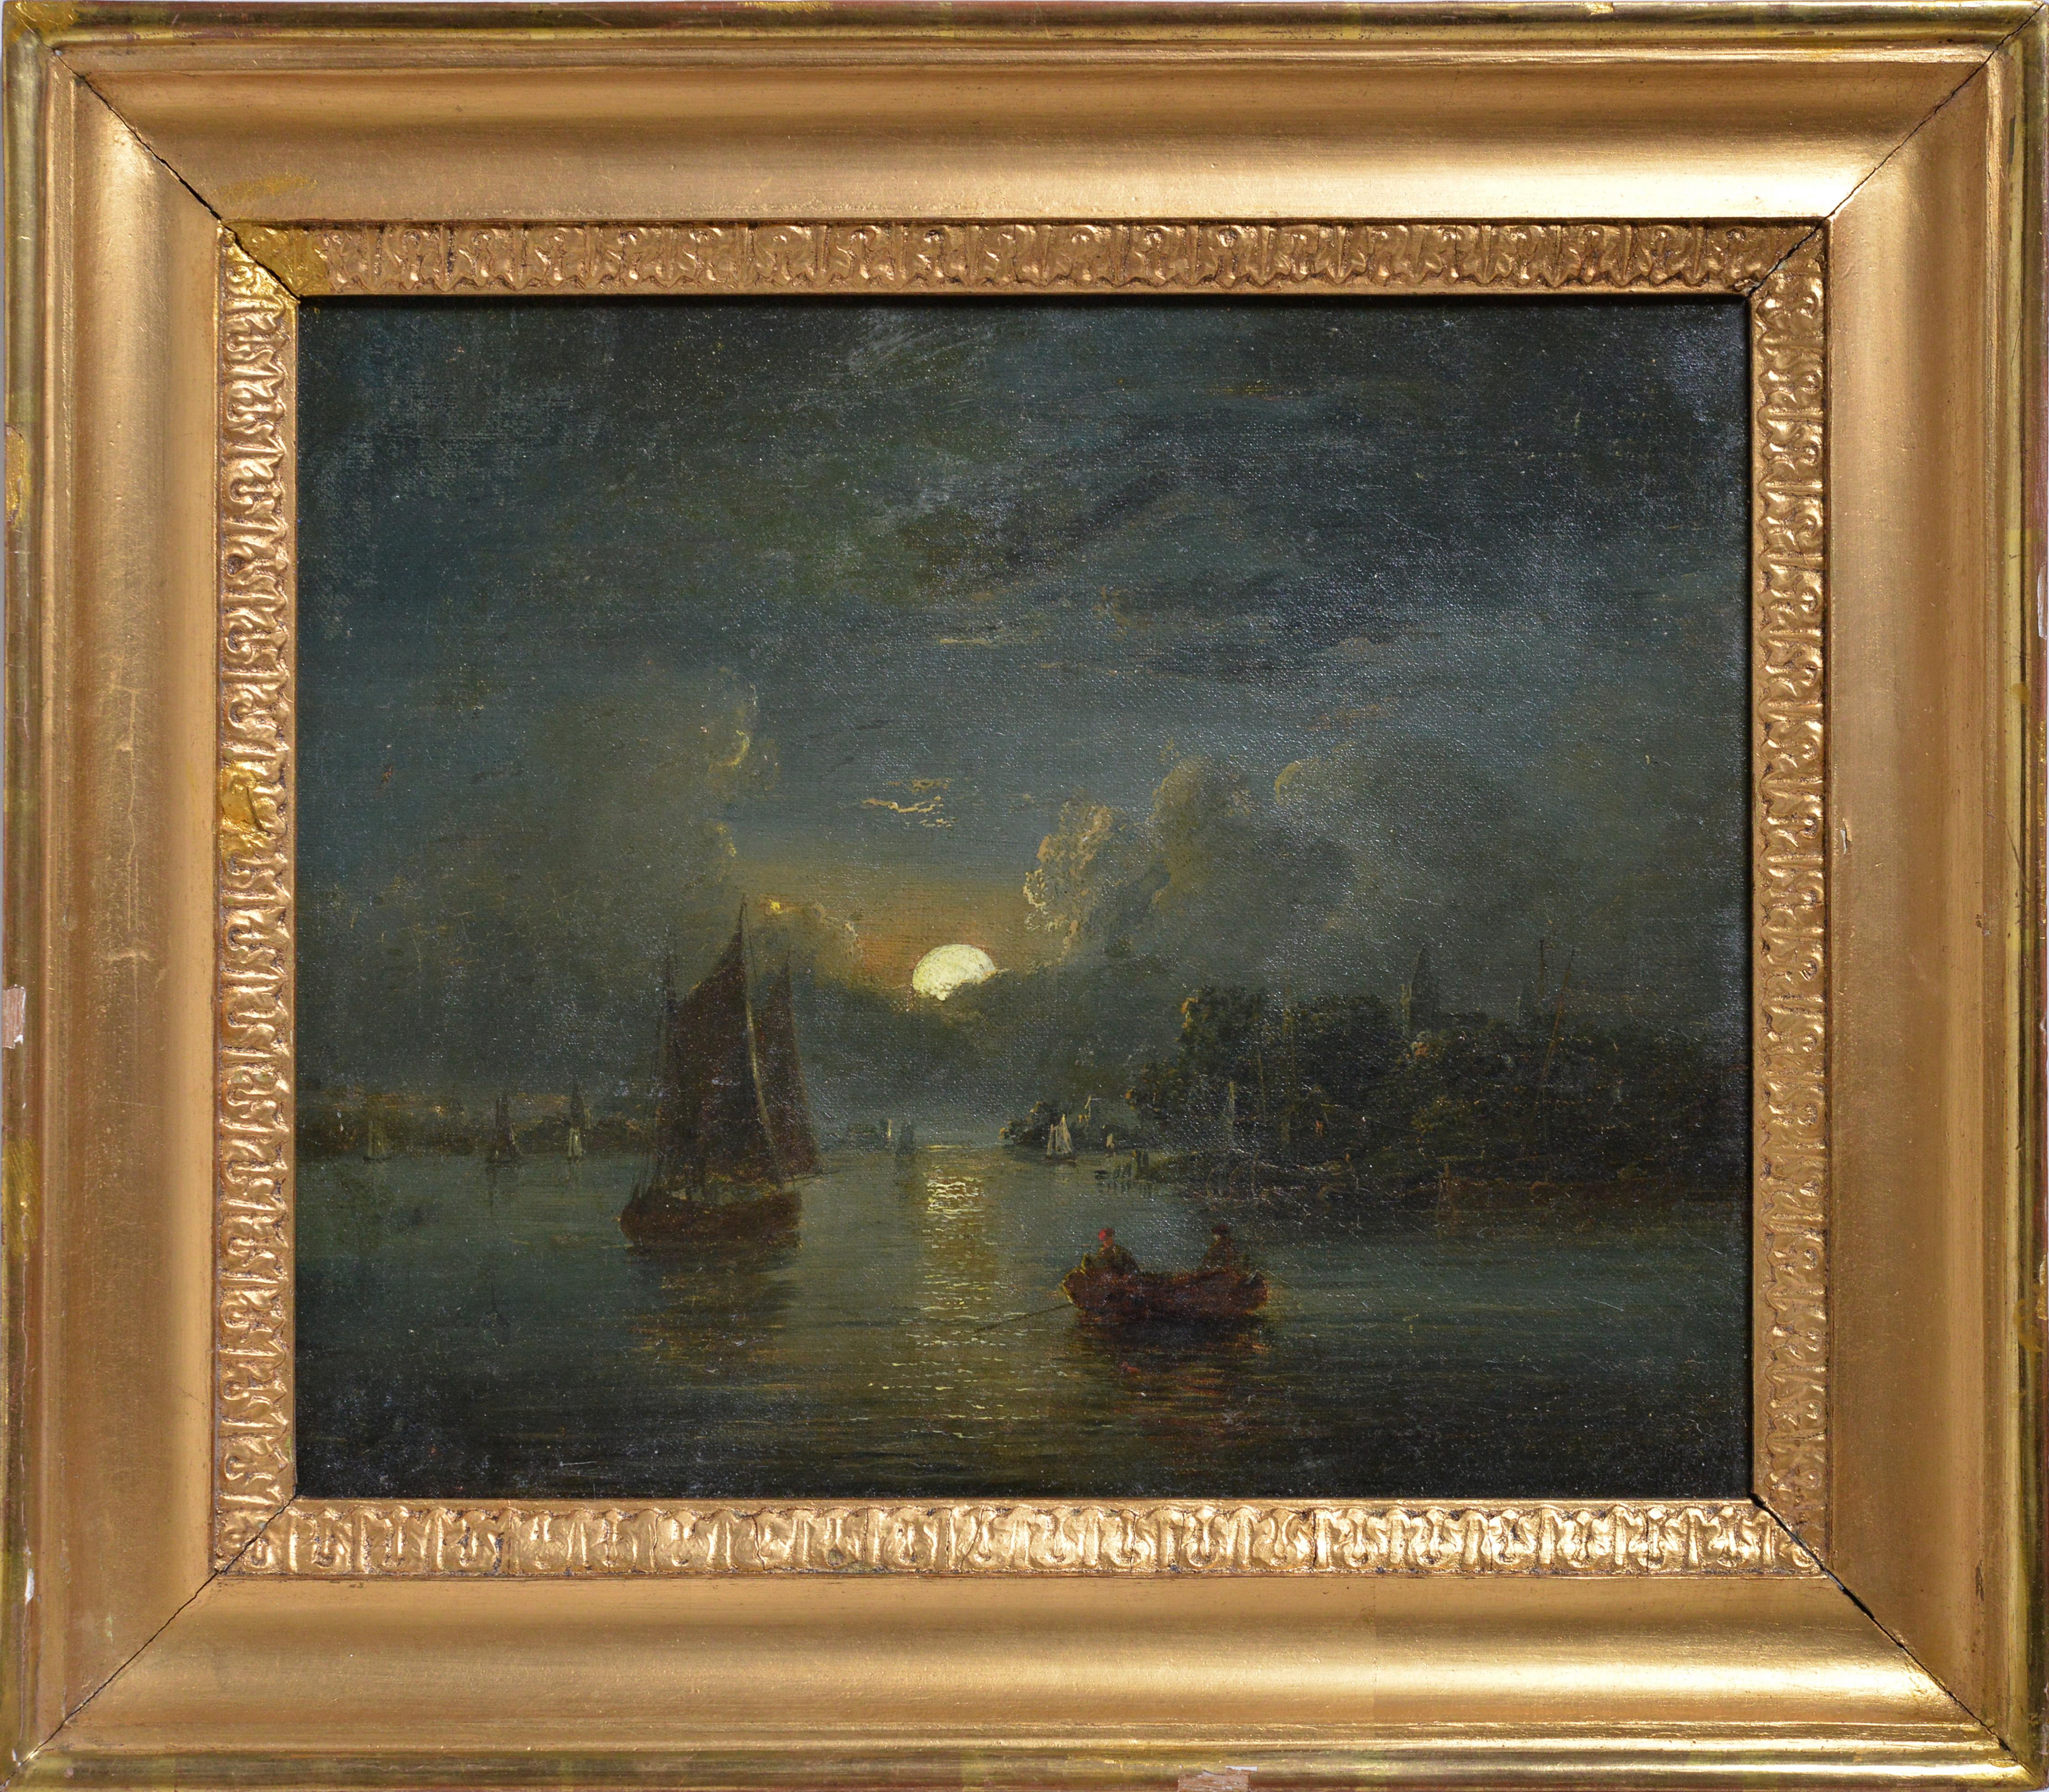 John Berney Crome Landscape Painting - British seascape Fishing boats in moonlight 19th century Oil painting Signed